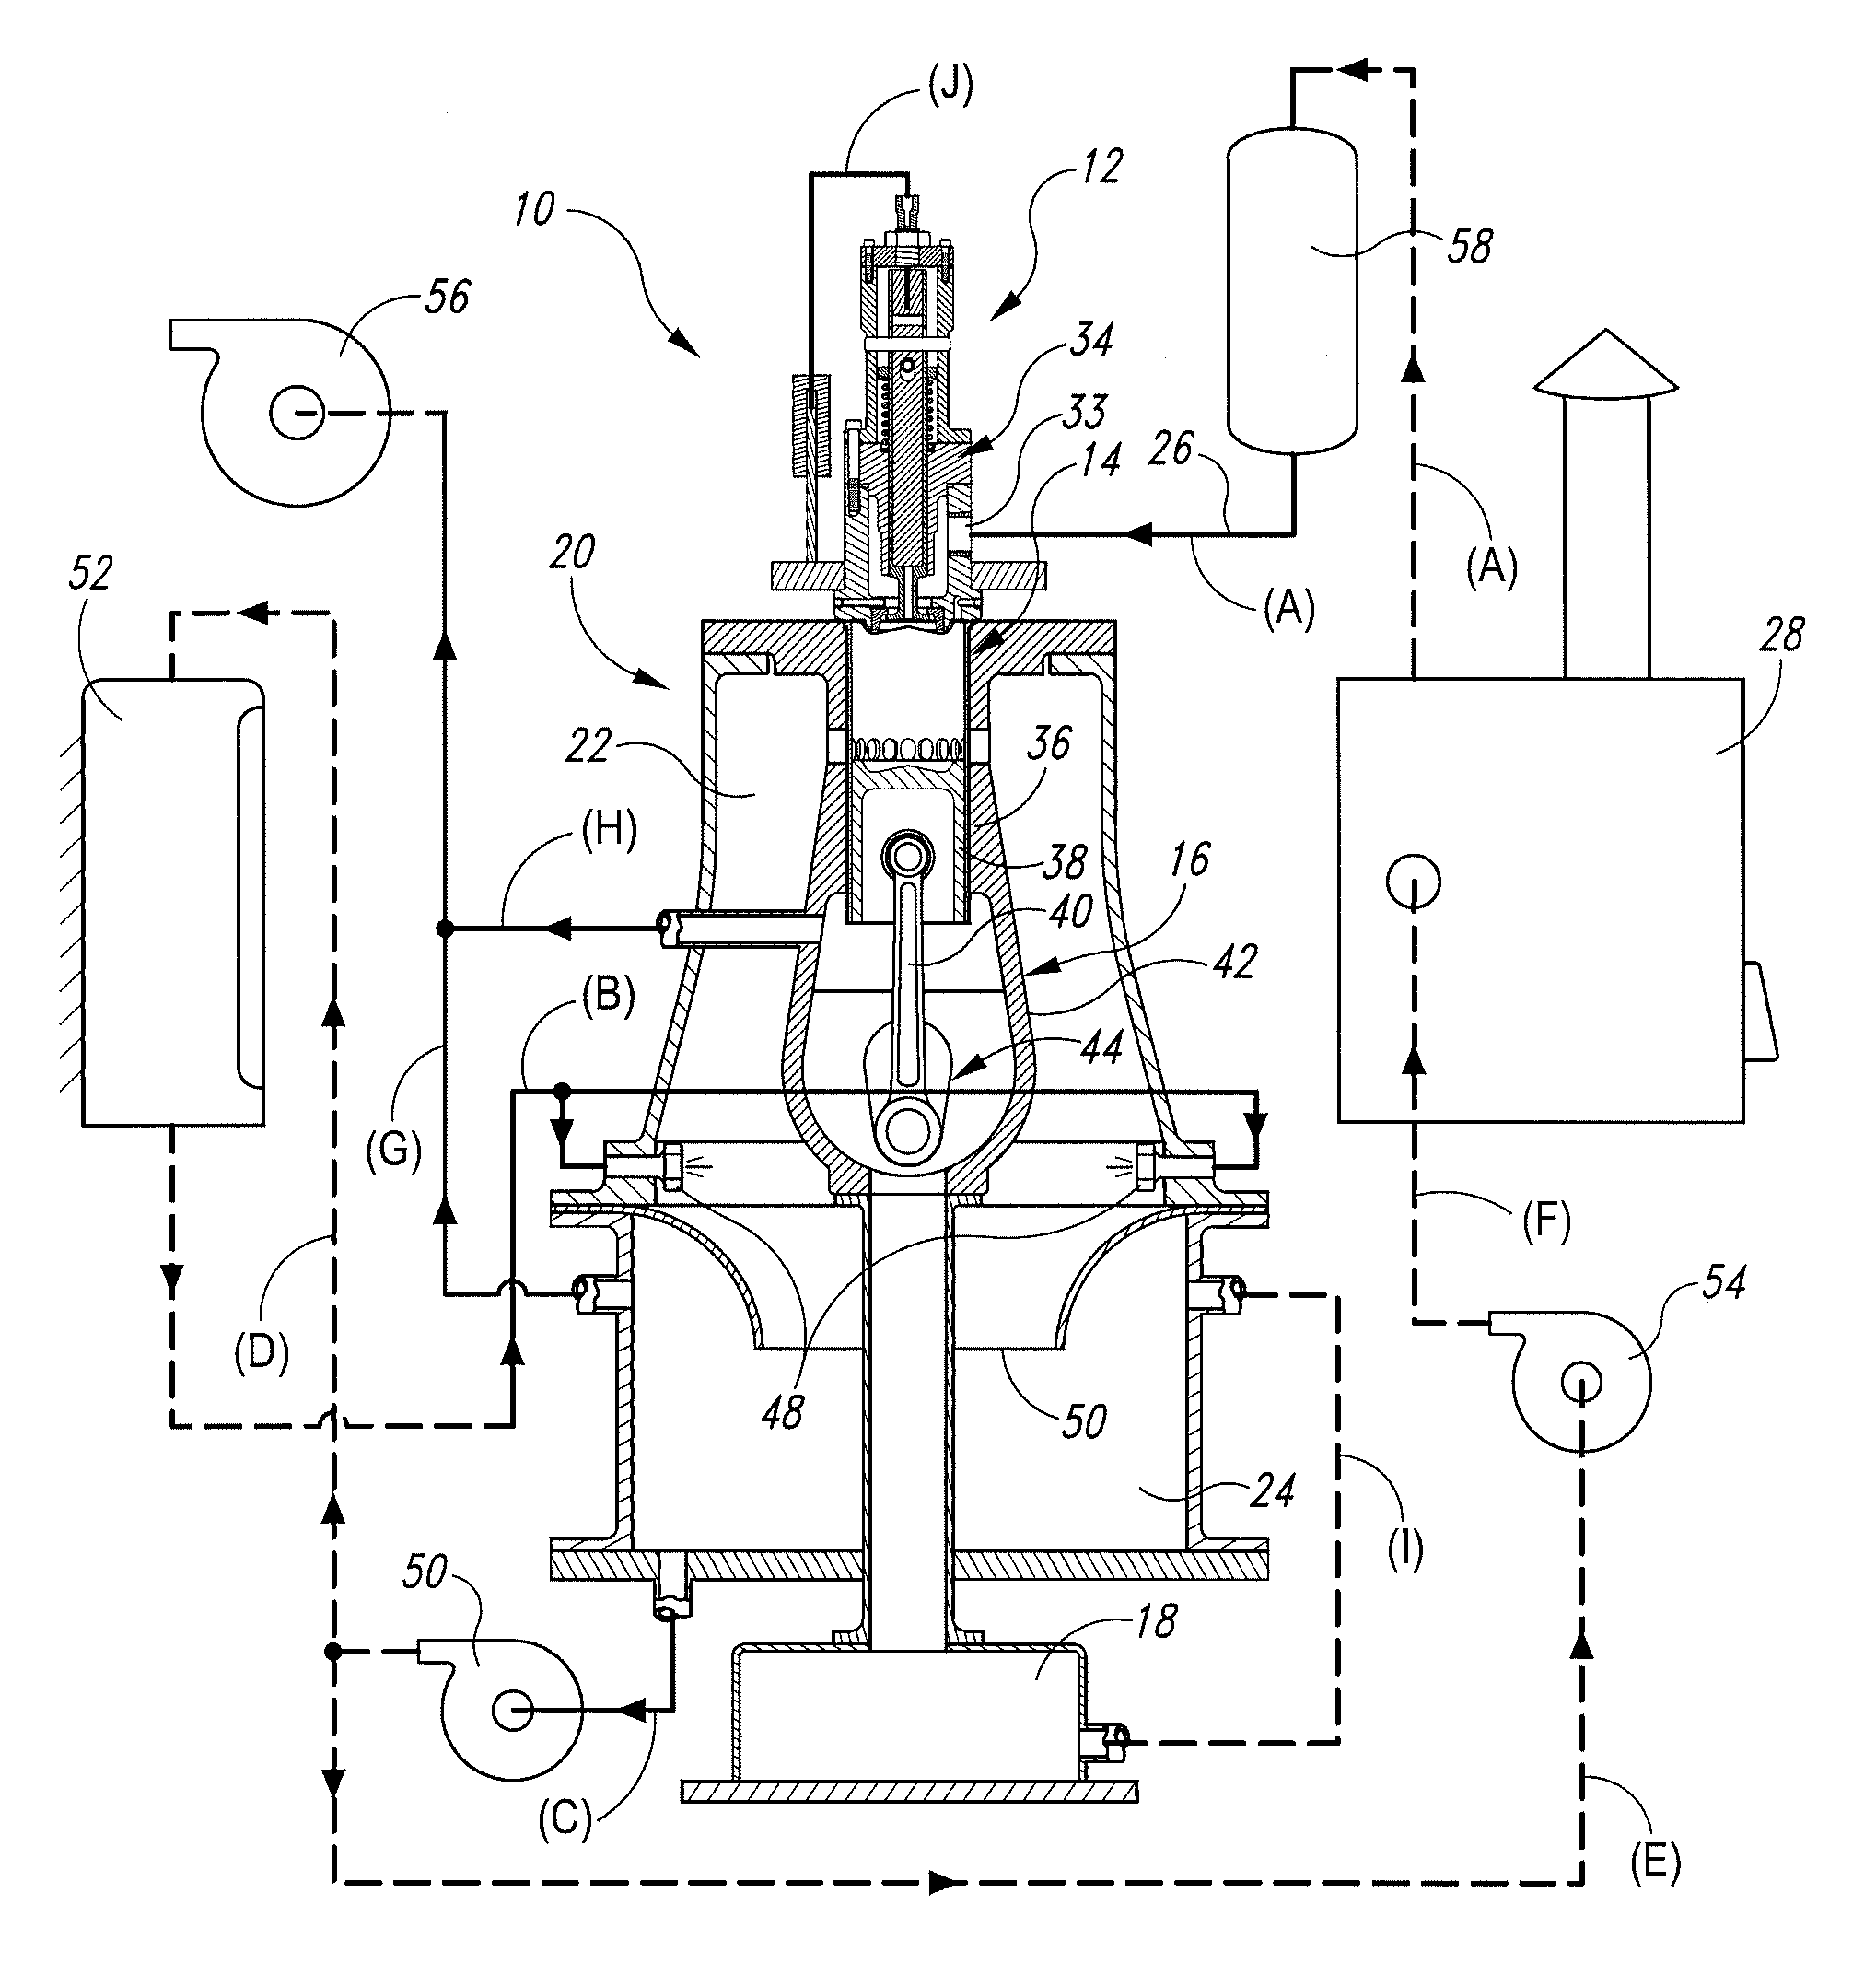 Advanced uniflow rankine engine and methods of use thereof